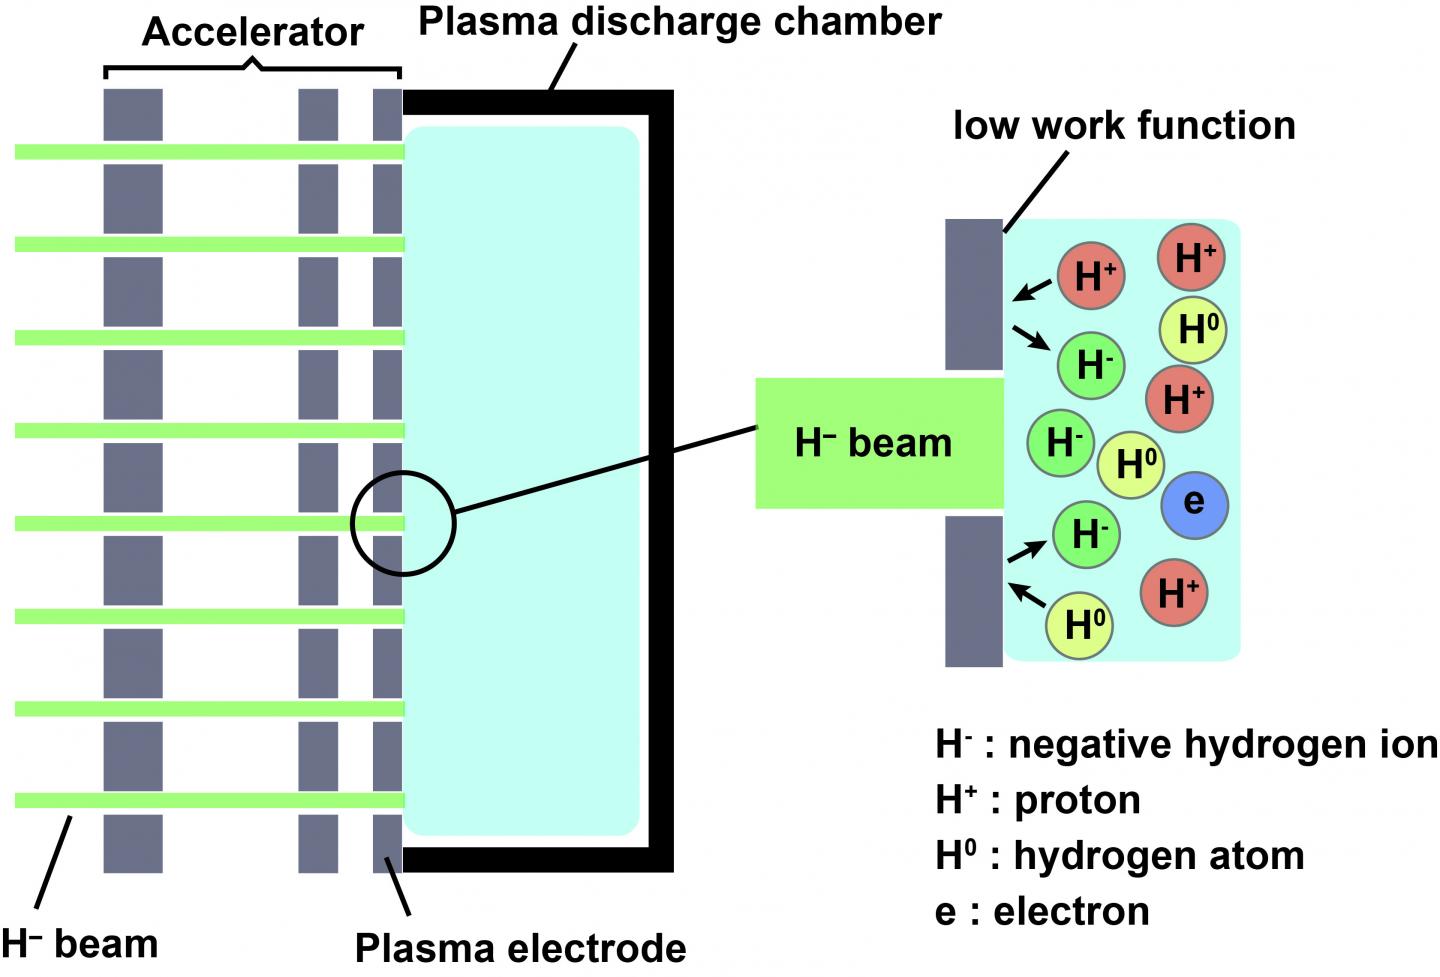 Simplified Image of Negative Hydrogen Ion Source